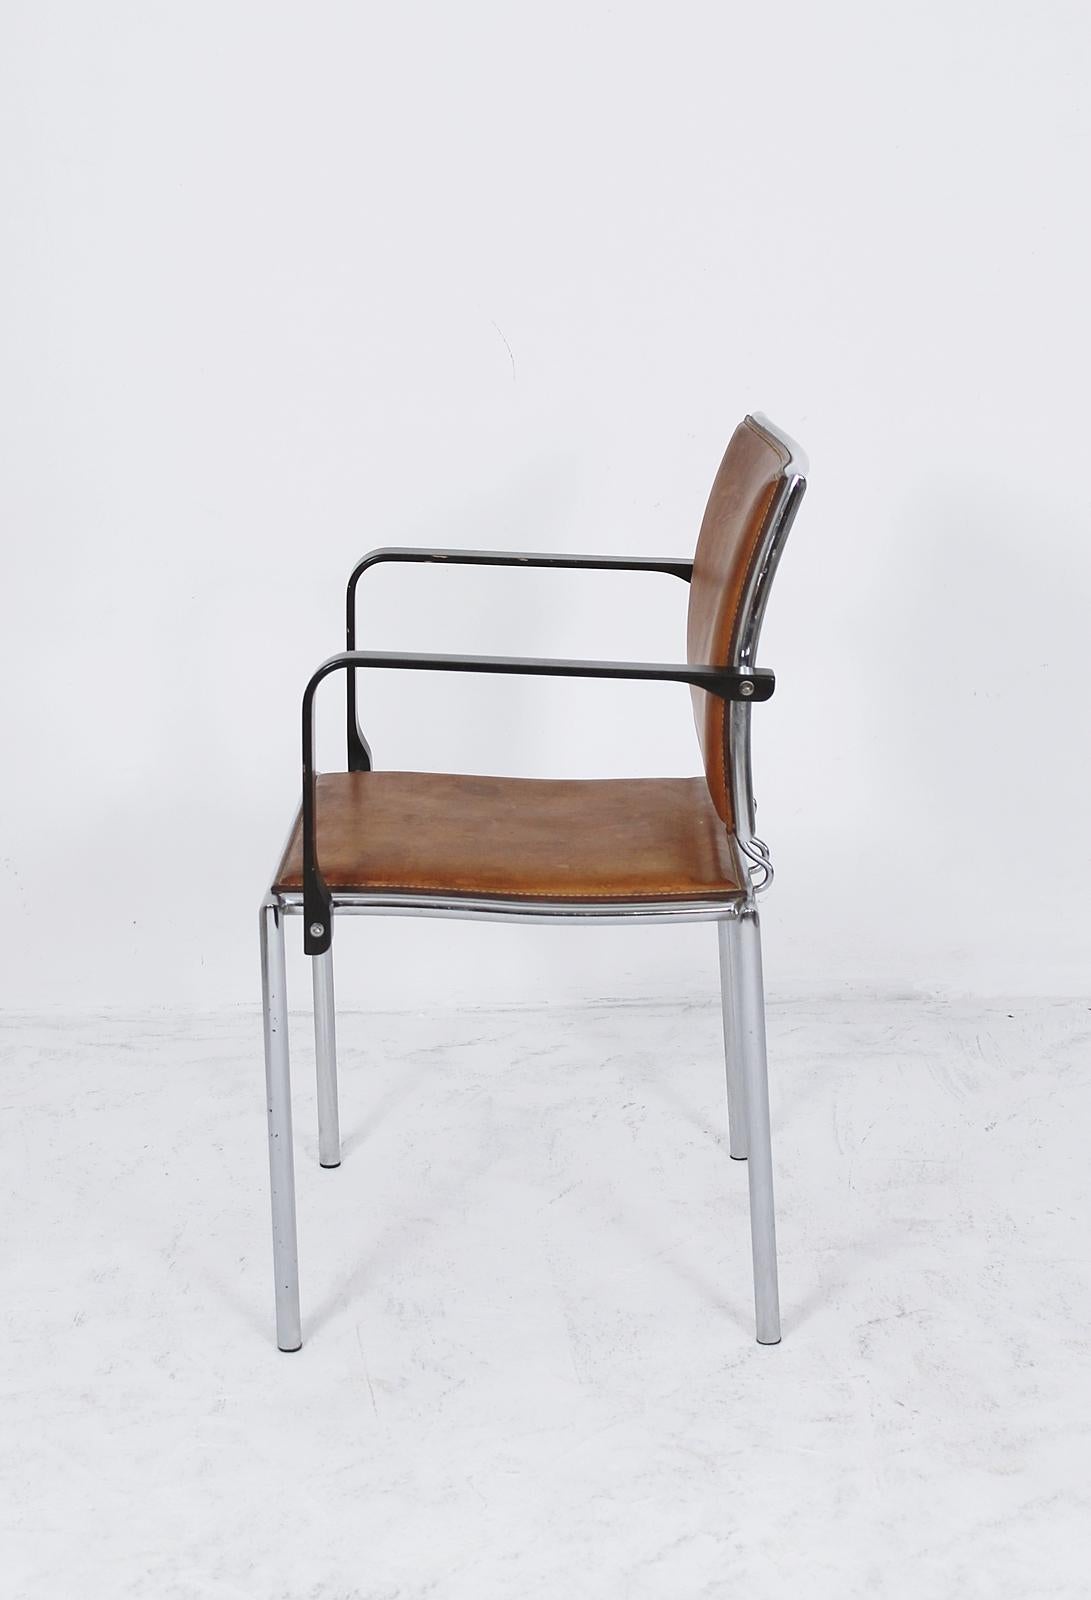 Swiss Armchair Quadro Steel by Bruno Rey & Charles Polin for Dietiker, 1990s For Sale 4